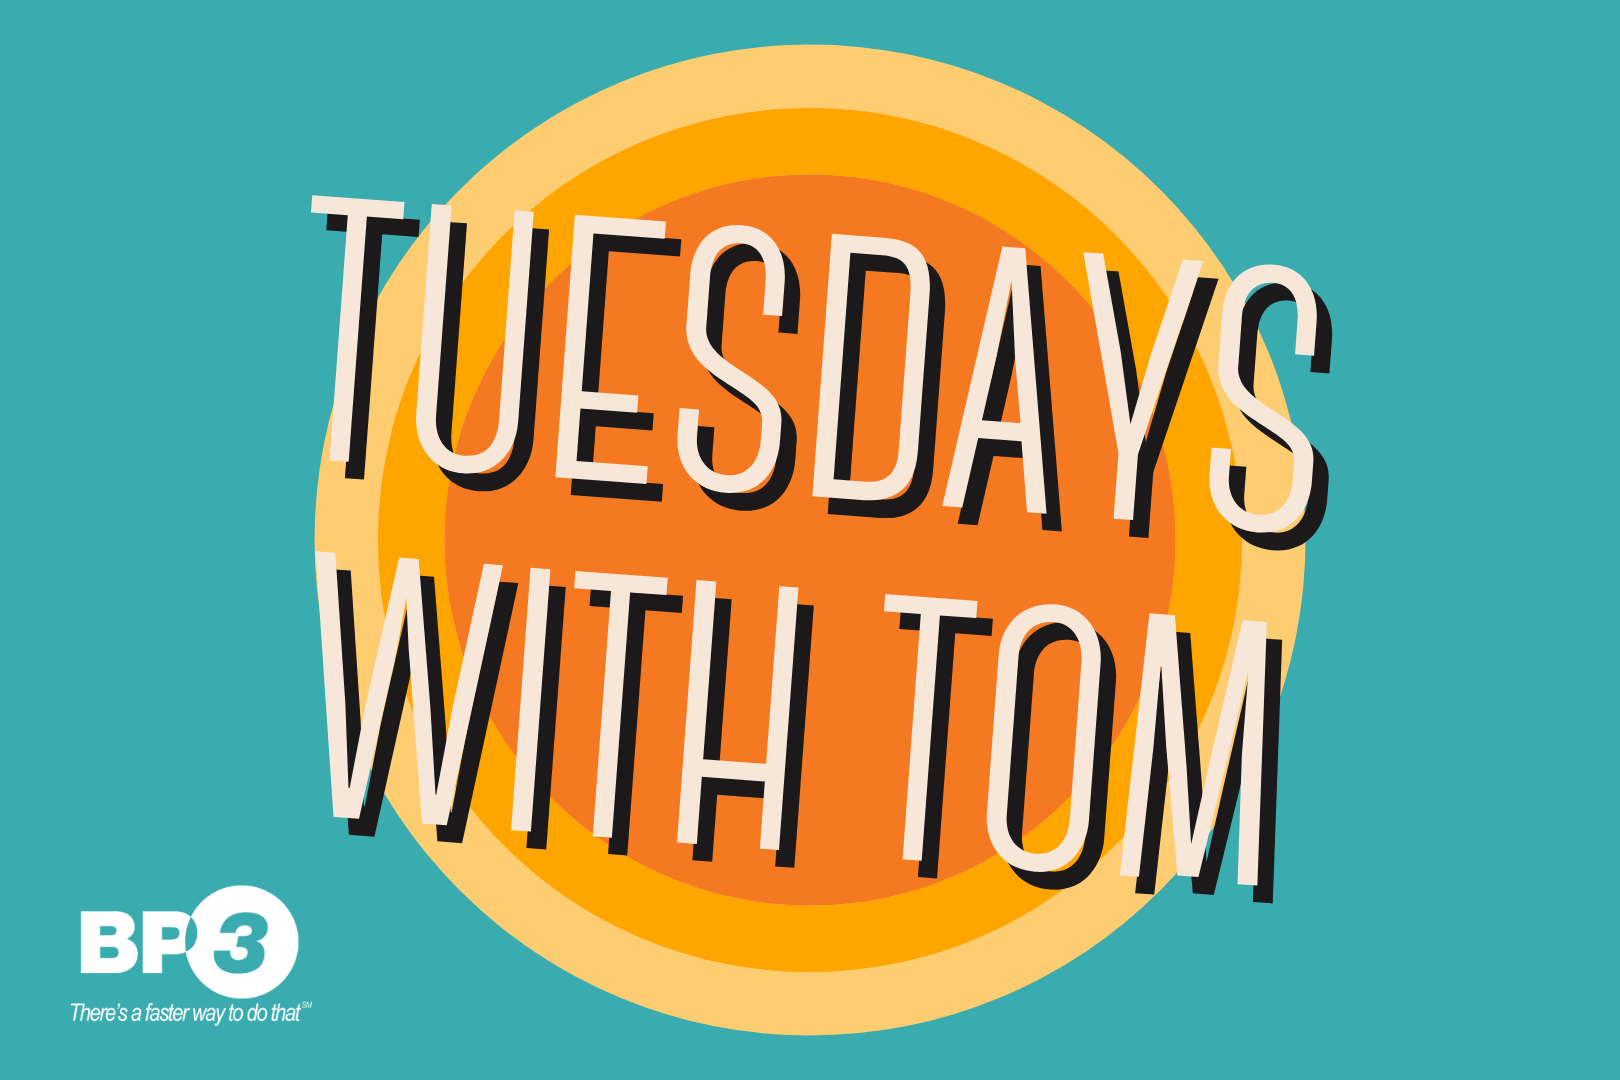 Tuesdays with Tom - Data Extractors